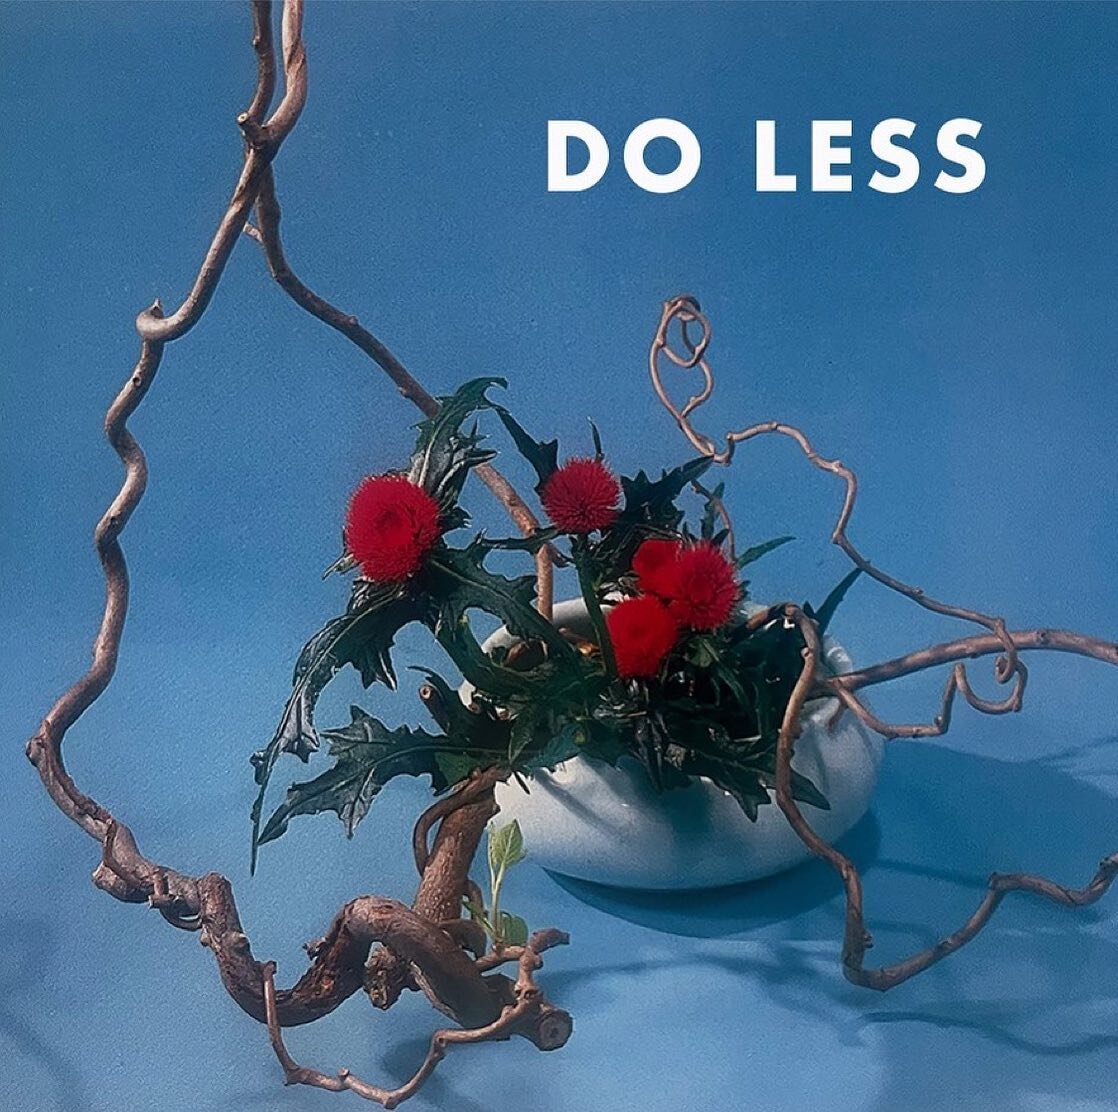 I&rsquo;m looking forward to being part of this special show called &ldquo;DO LESS&rdquo;, which is all about slowing down, in a psychiatric doctor's office, curated by @rebeccapristoop @_collectiveview_,  the show will run for six months starting th